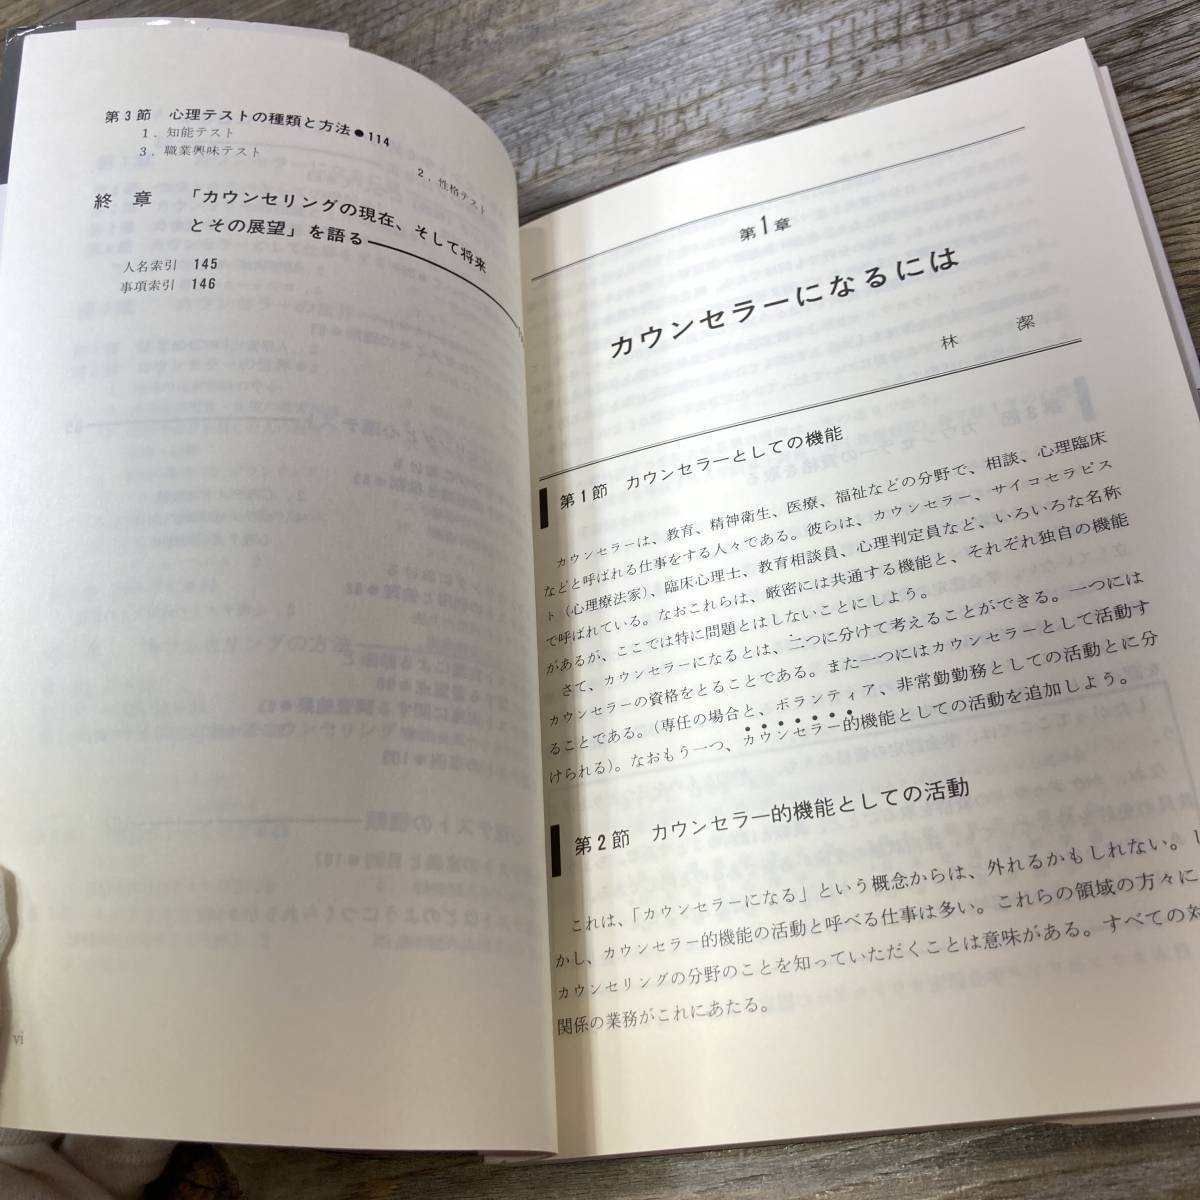 G-3846# counseling . psychological test #...book@. male Suzuki . history / work #b lane publish #1989 year 11 month 20 day issue the first version no. 1.